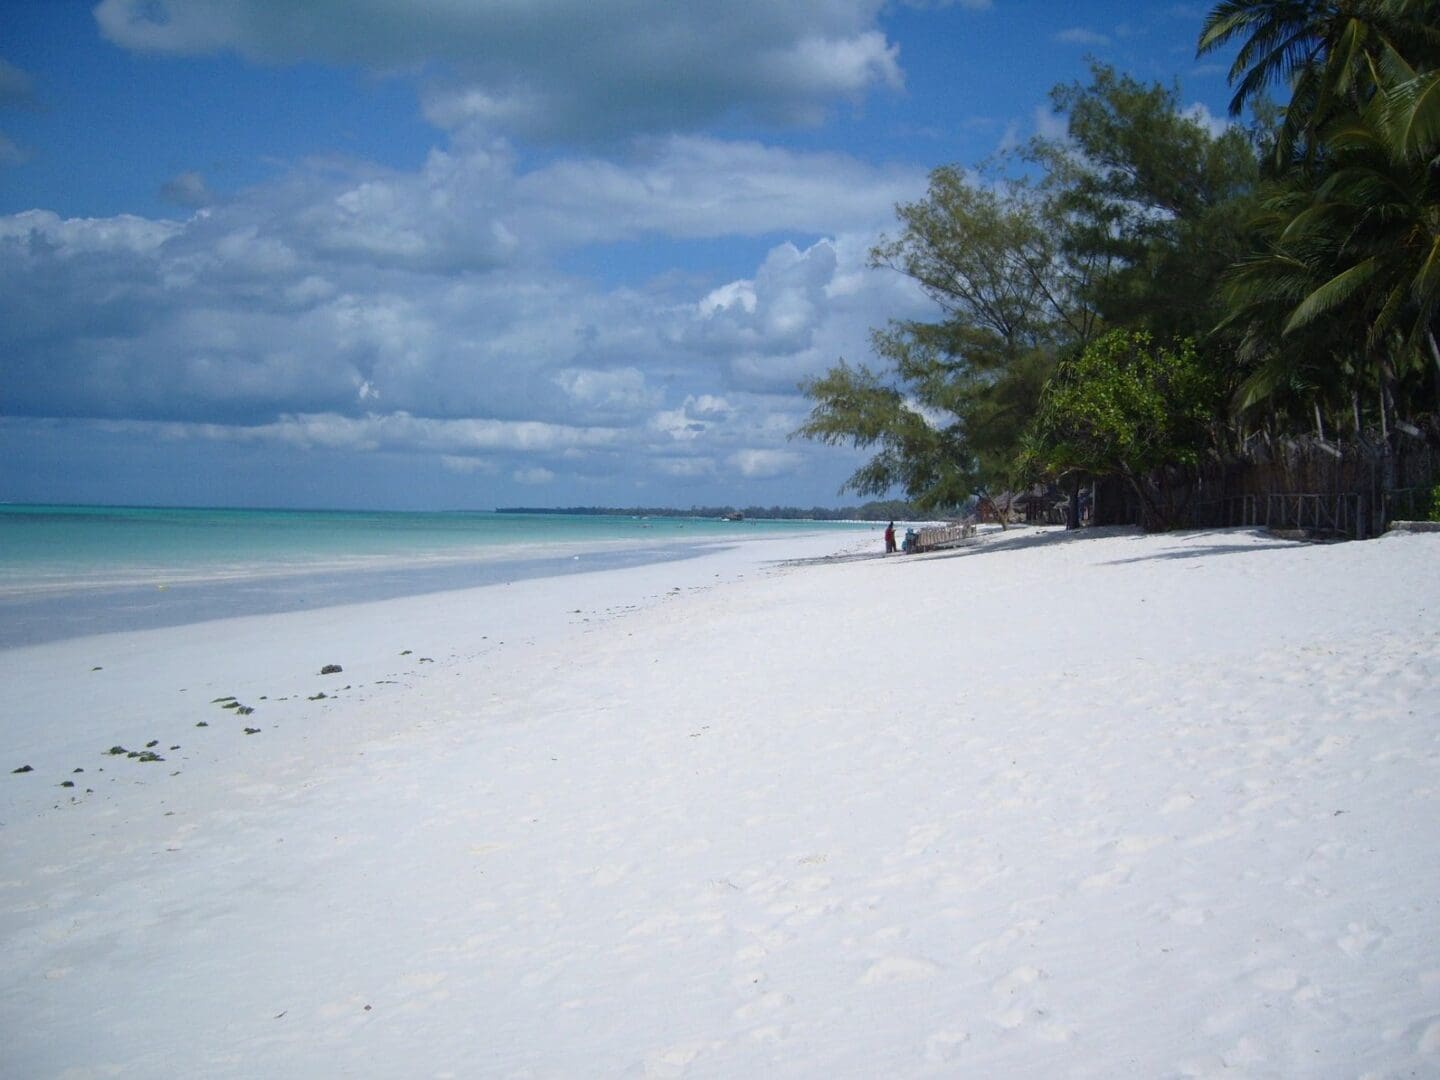 A beach with people walking on it and trees in the background.